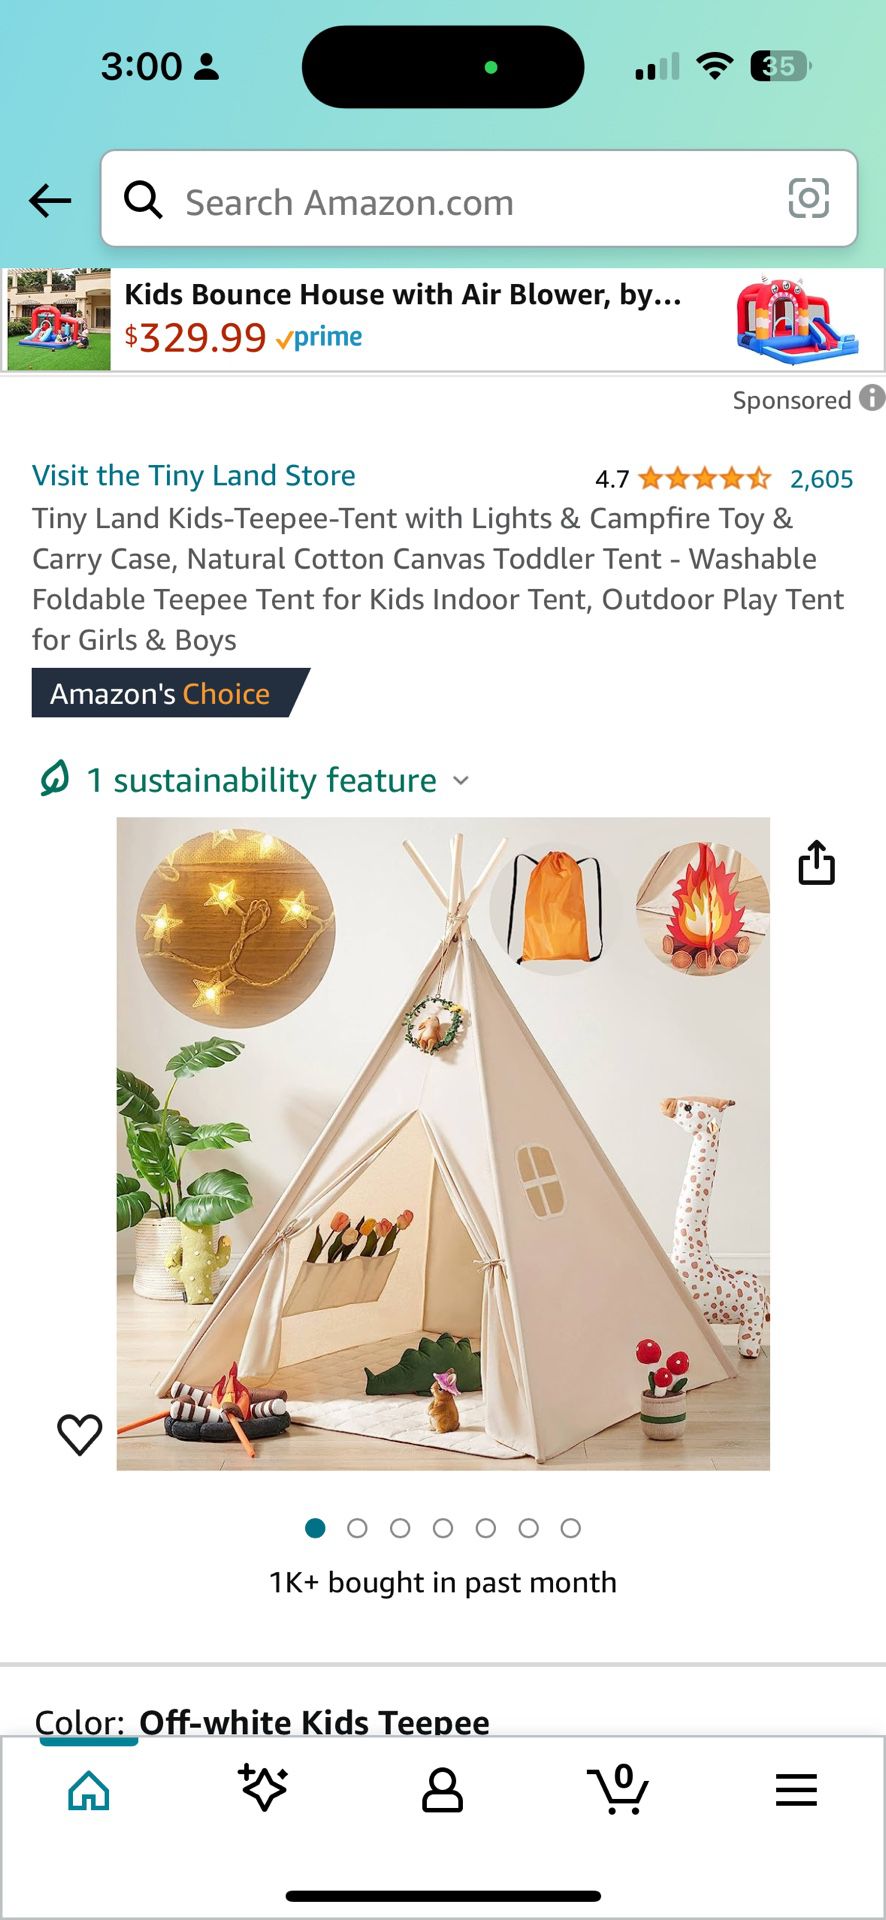 Tiny Land Kids-Teepee-Tent with Lights & Campfire Toy & Carry Case, Natural Cotton Canvas Toddler Tent - Washable Foldable Teepee Tent for Kids Indoor